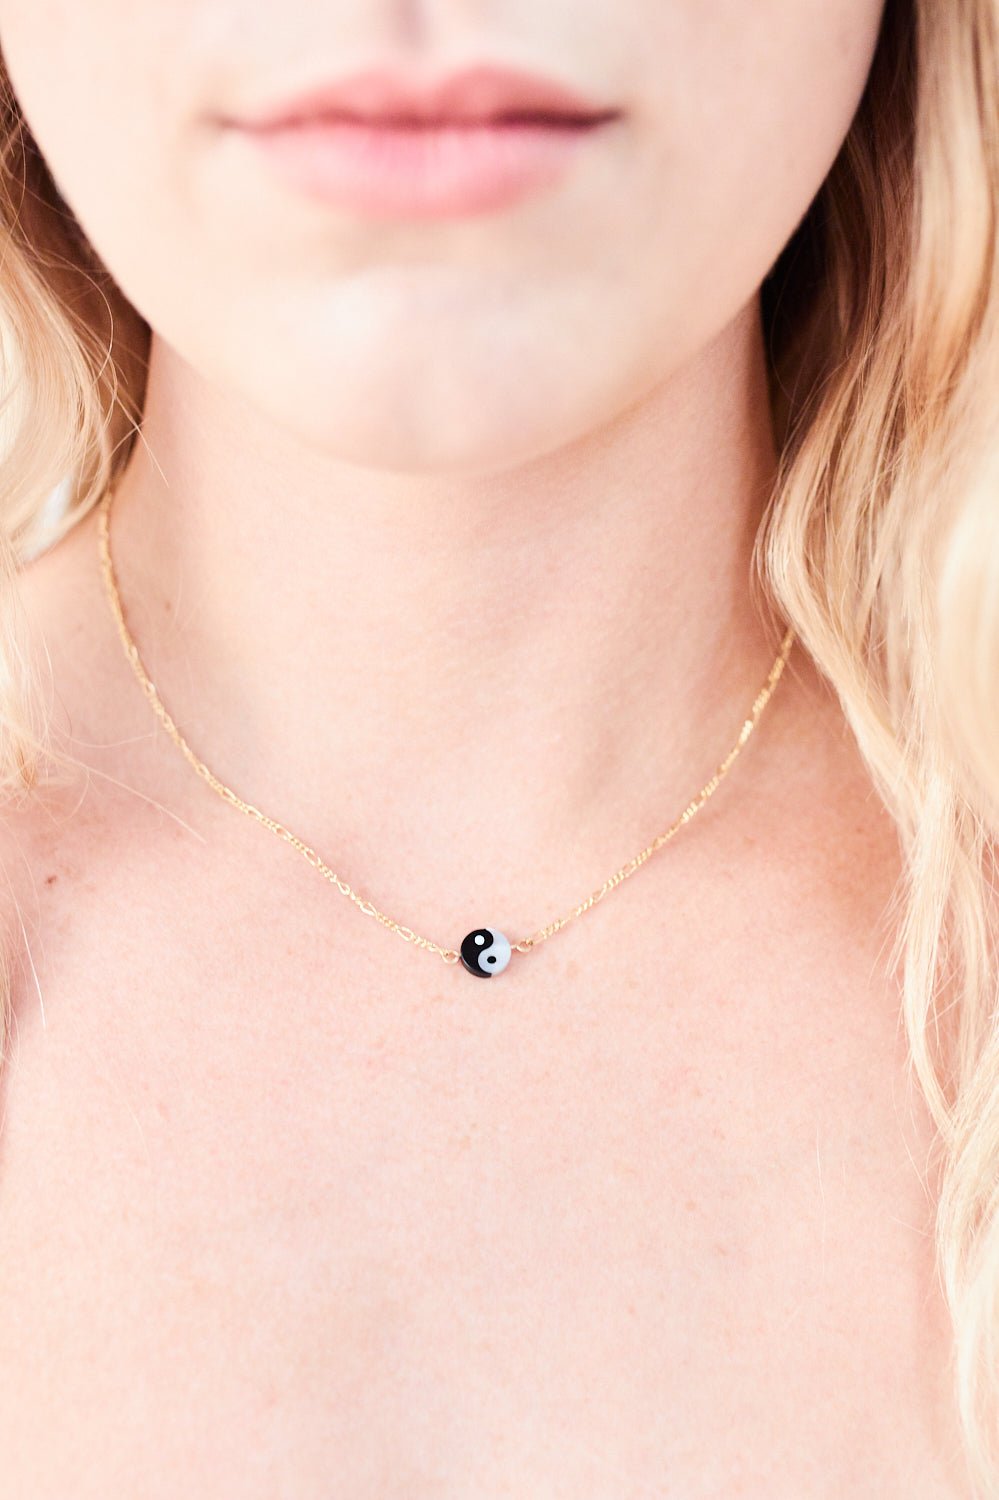 Yin Yang Necklace - Driftwood Maui & Home By Driftwood